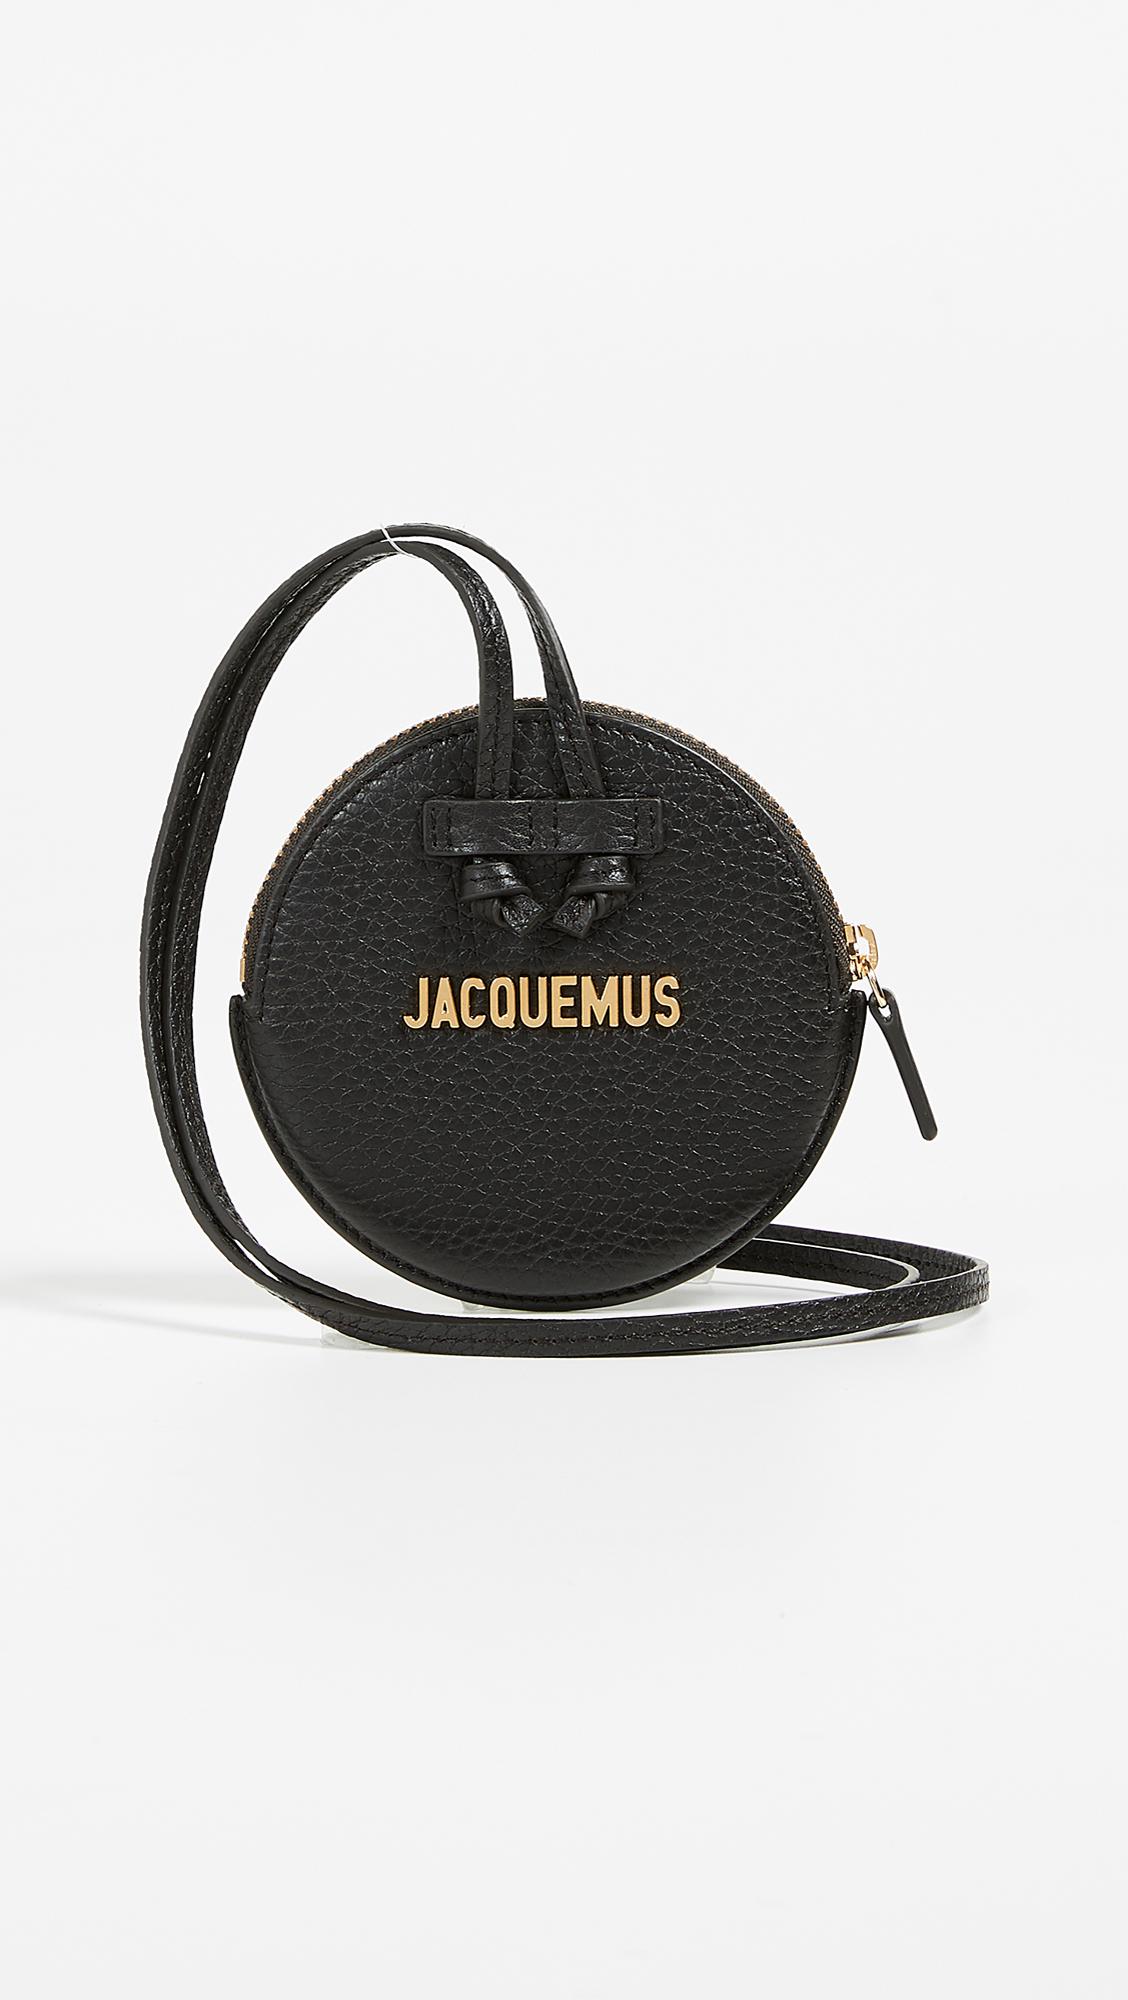 Jacquemus Le Pitchou Leather Coin Purse in Black - Lyst